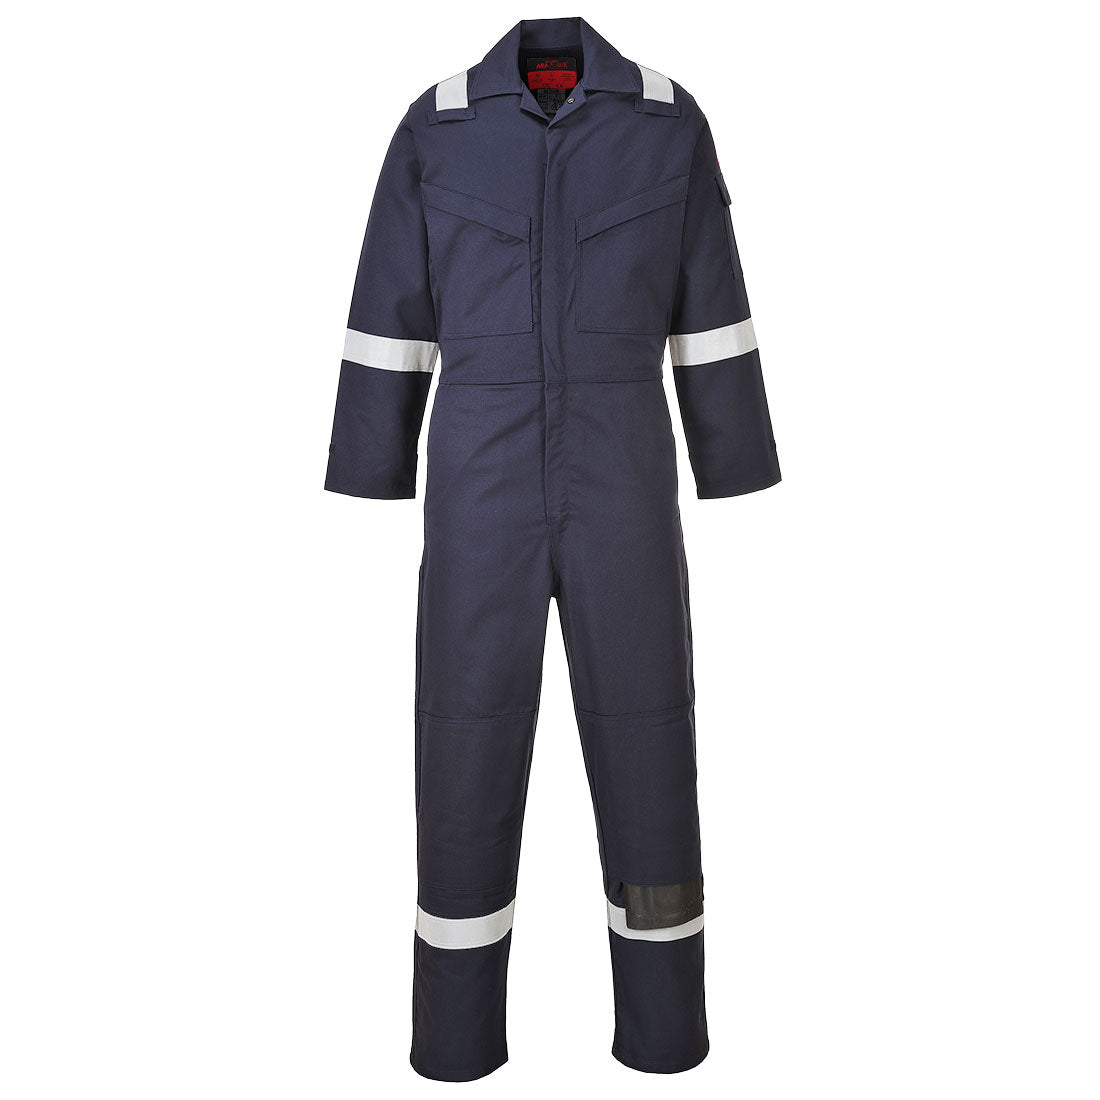 Araflame Gold Coverall - arbeitskleidung-gmbh